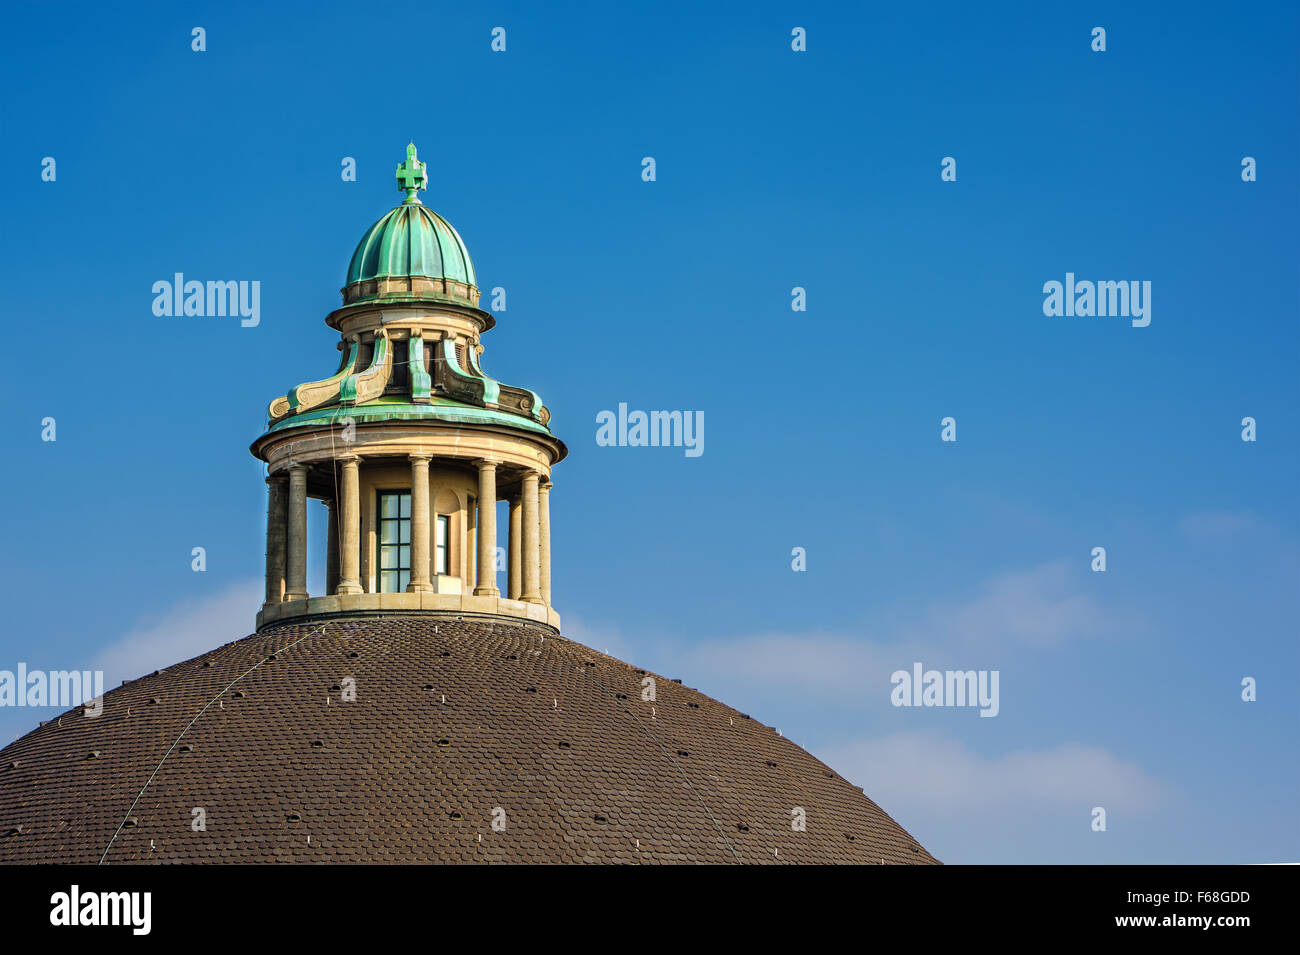 November 2015, dome of the main building of the Swiss Federal Institut of Technology (ETH) in Zurich (Switzerland), HDR-techniqu Stock Photo